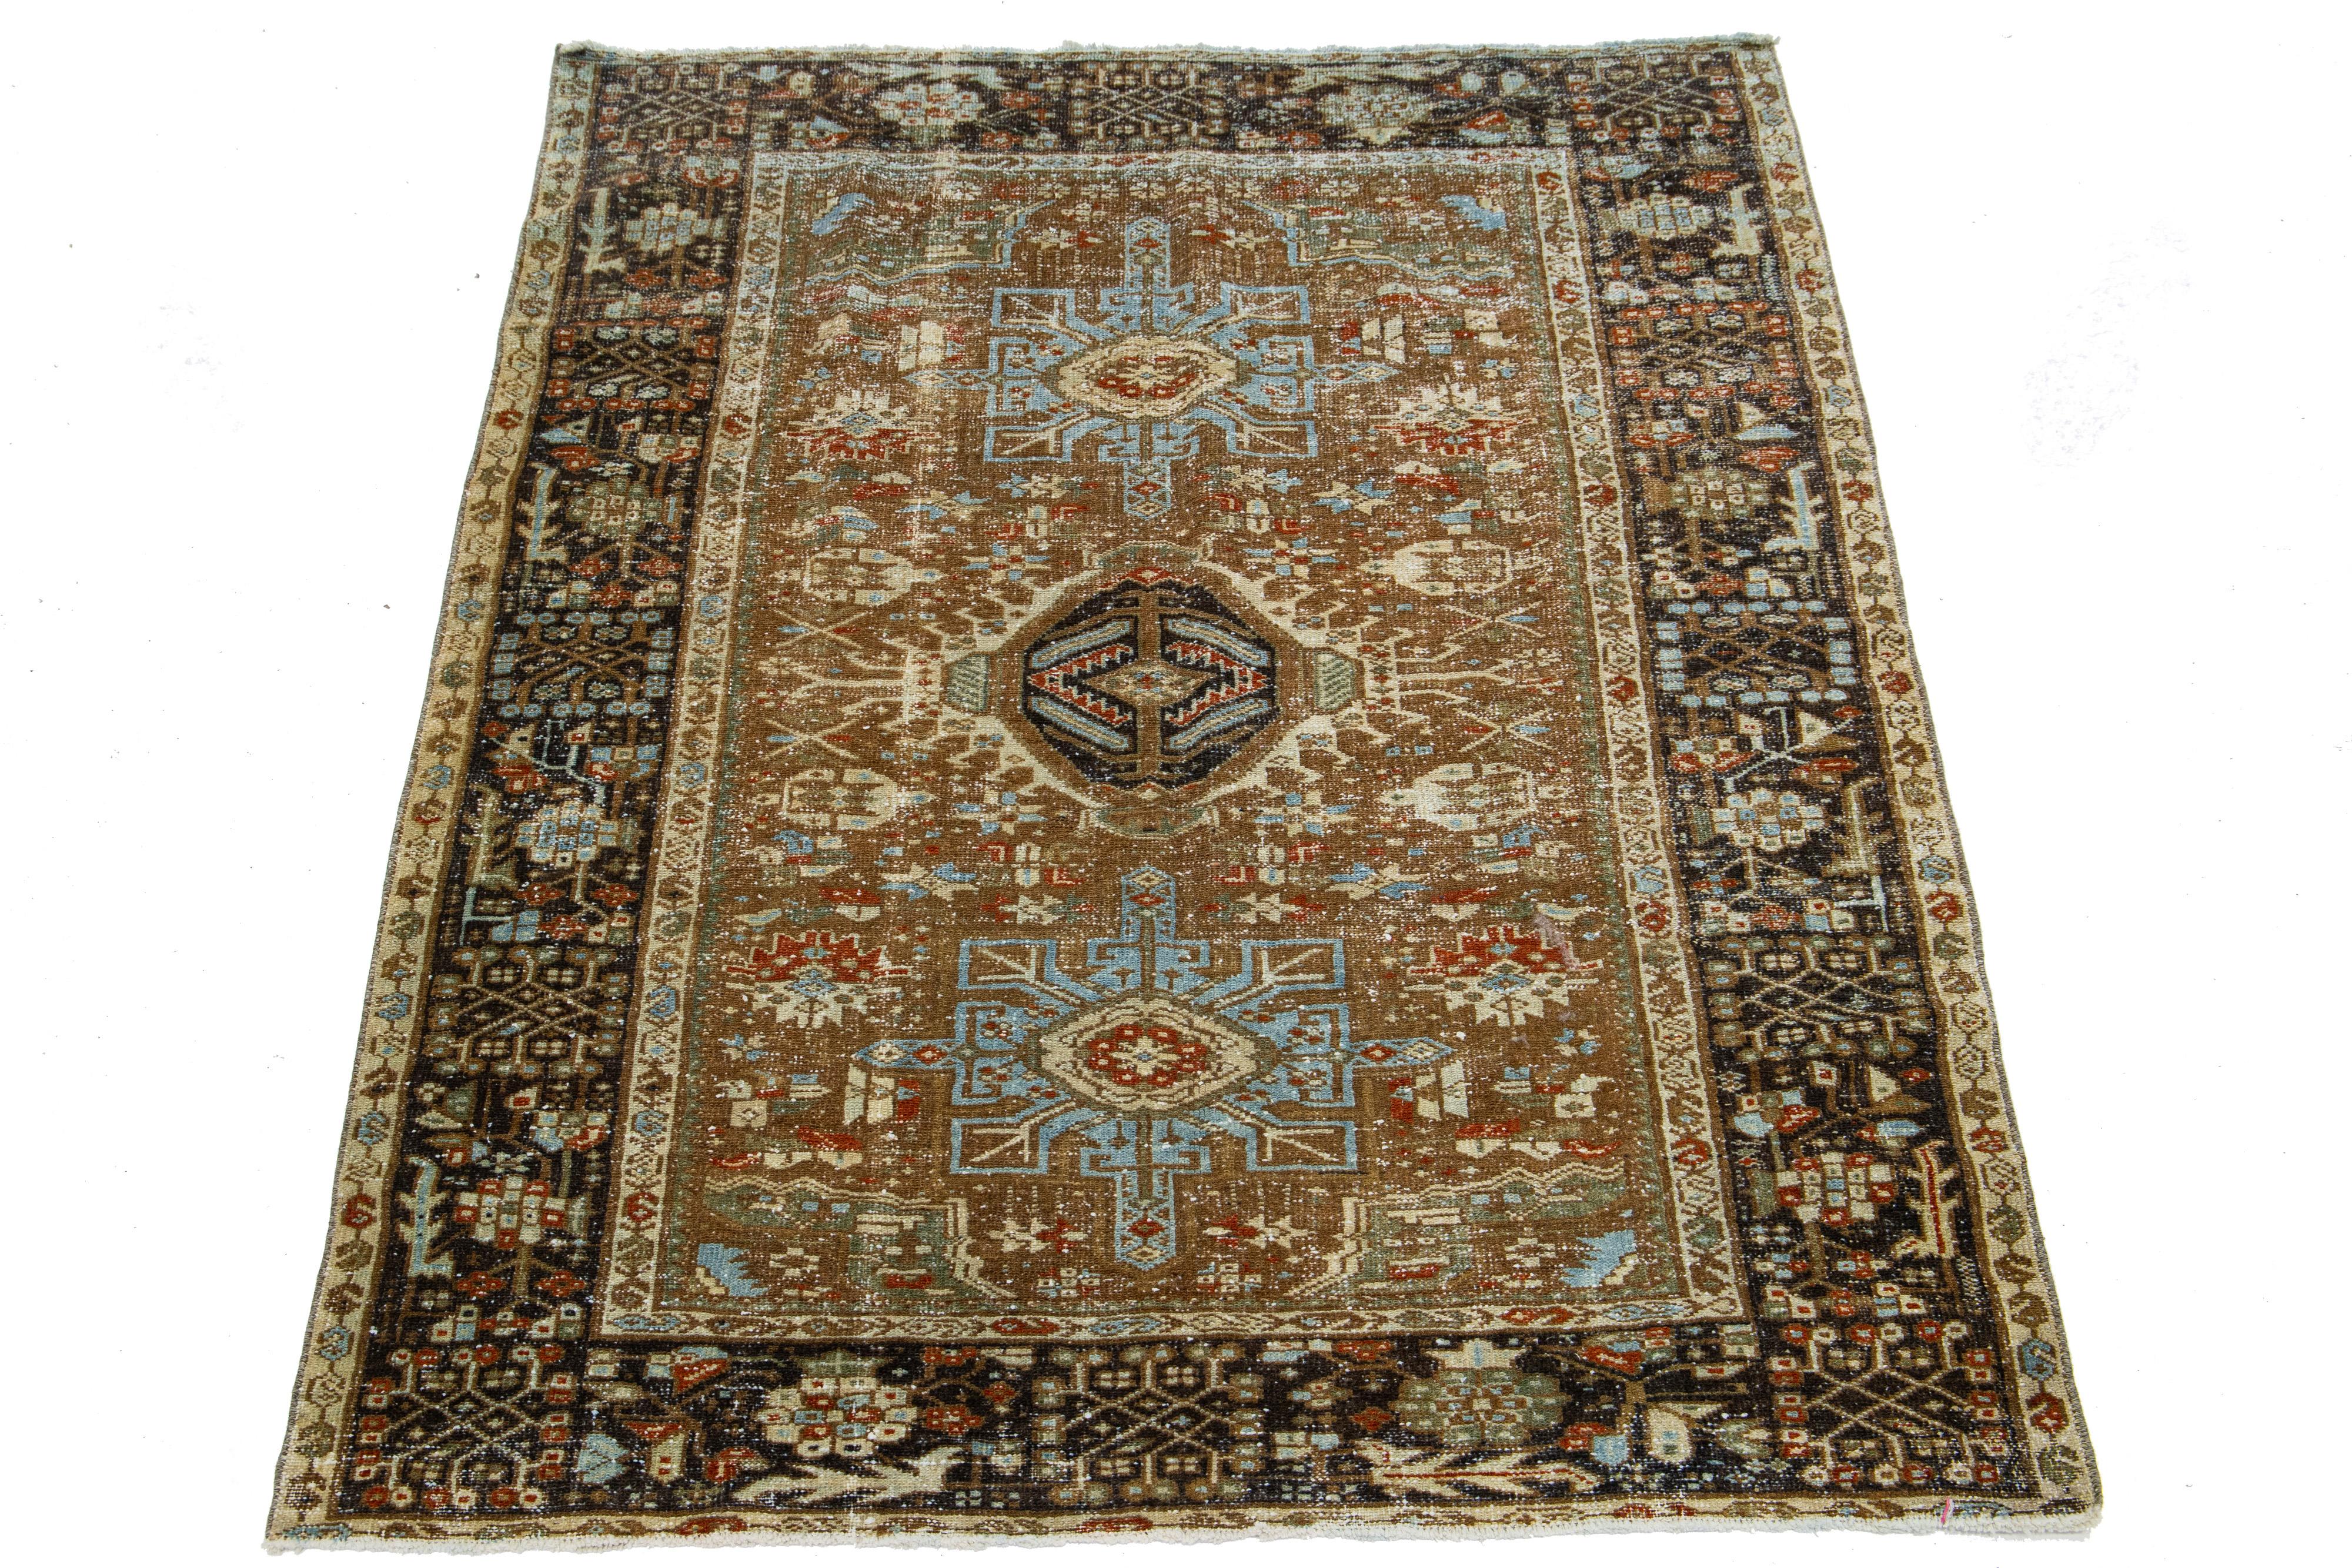 This Persian wool rug showcases an exquisite traditional floral medallion design with striking rust, beige, and blue accents against a brown background. 

This rug measures 4'6